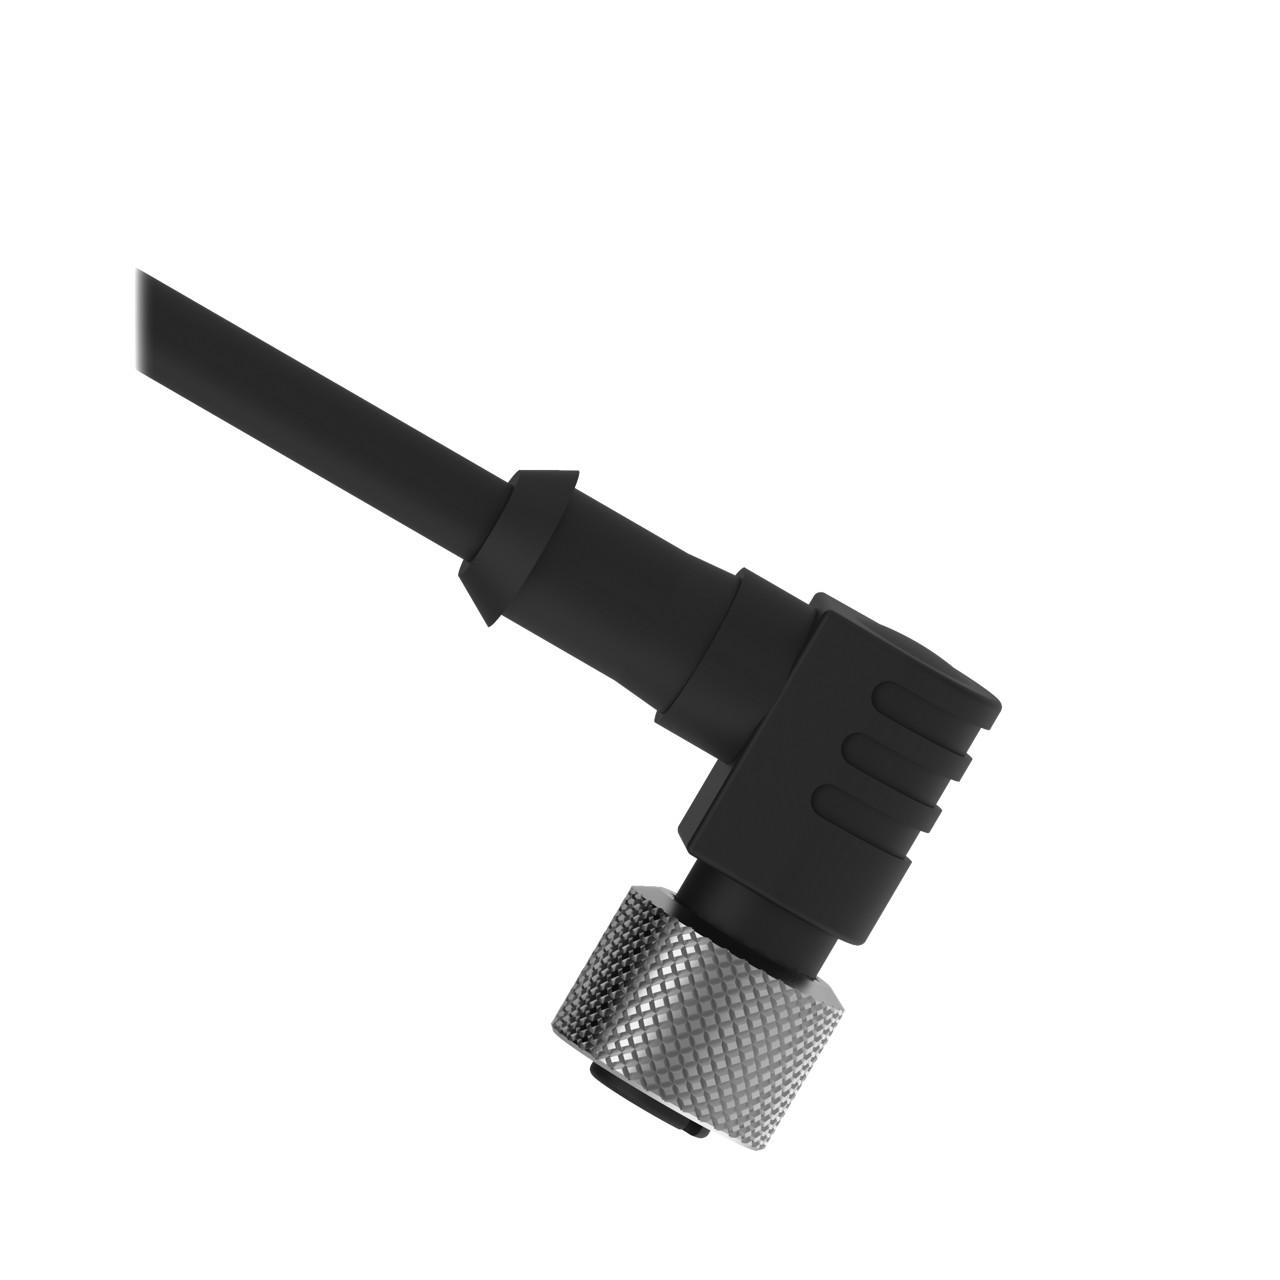 Banner MQDC-430RA Euro-Style Quick Disconnect Cable, 4-Pin Right-Angle Connector, 9 m (30 ft) in Length, Nickel-plated brass coupling nut